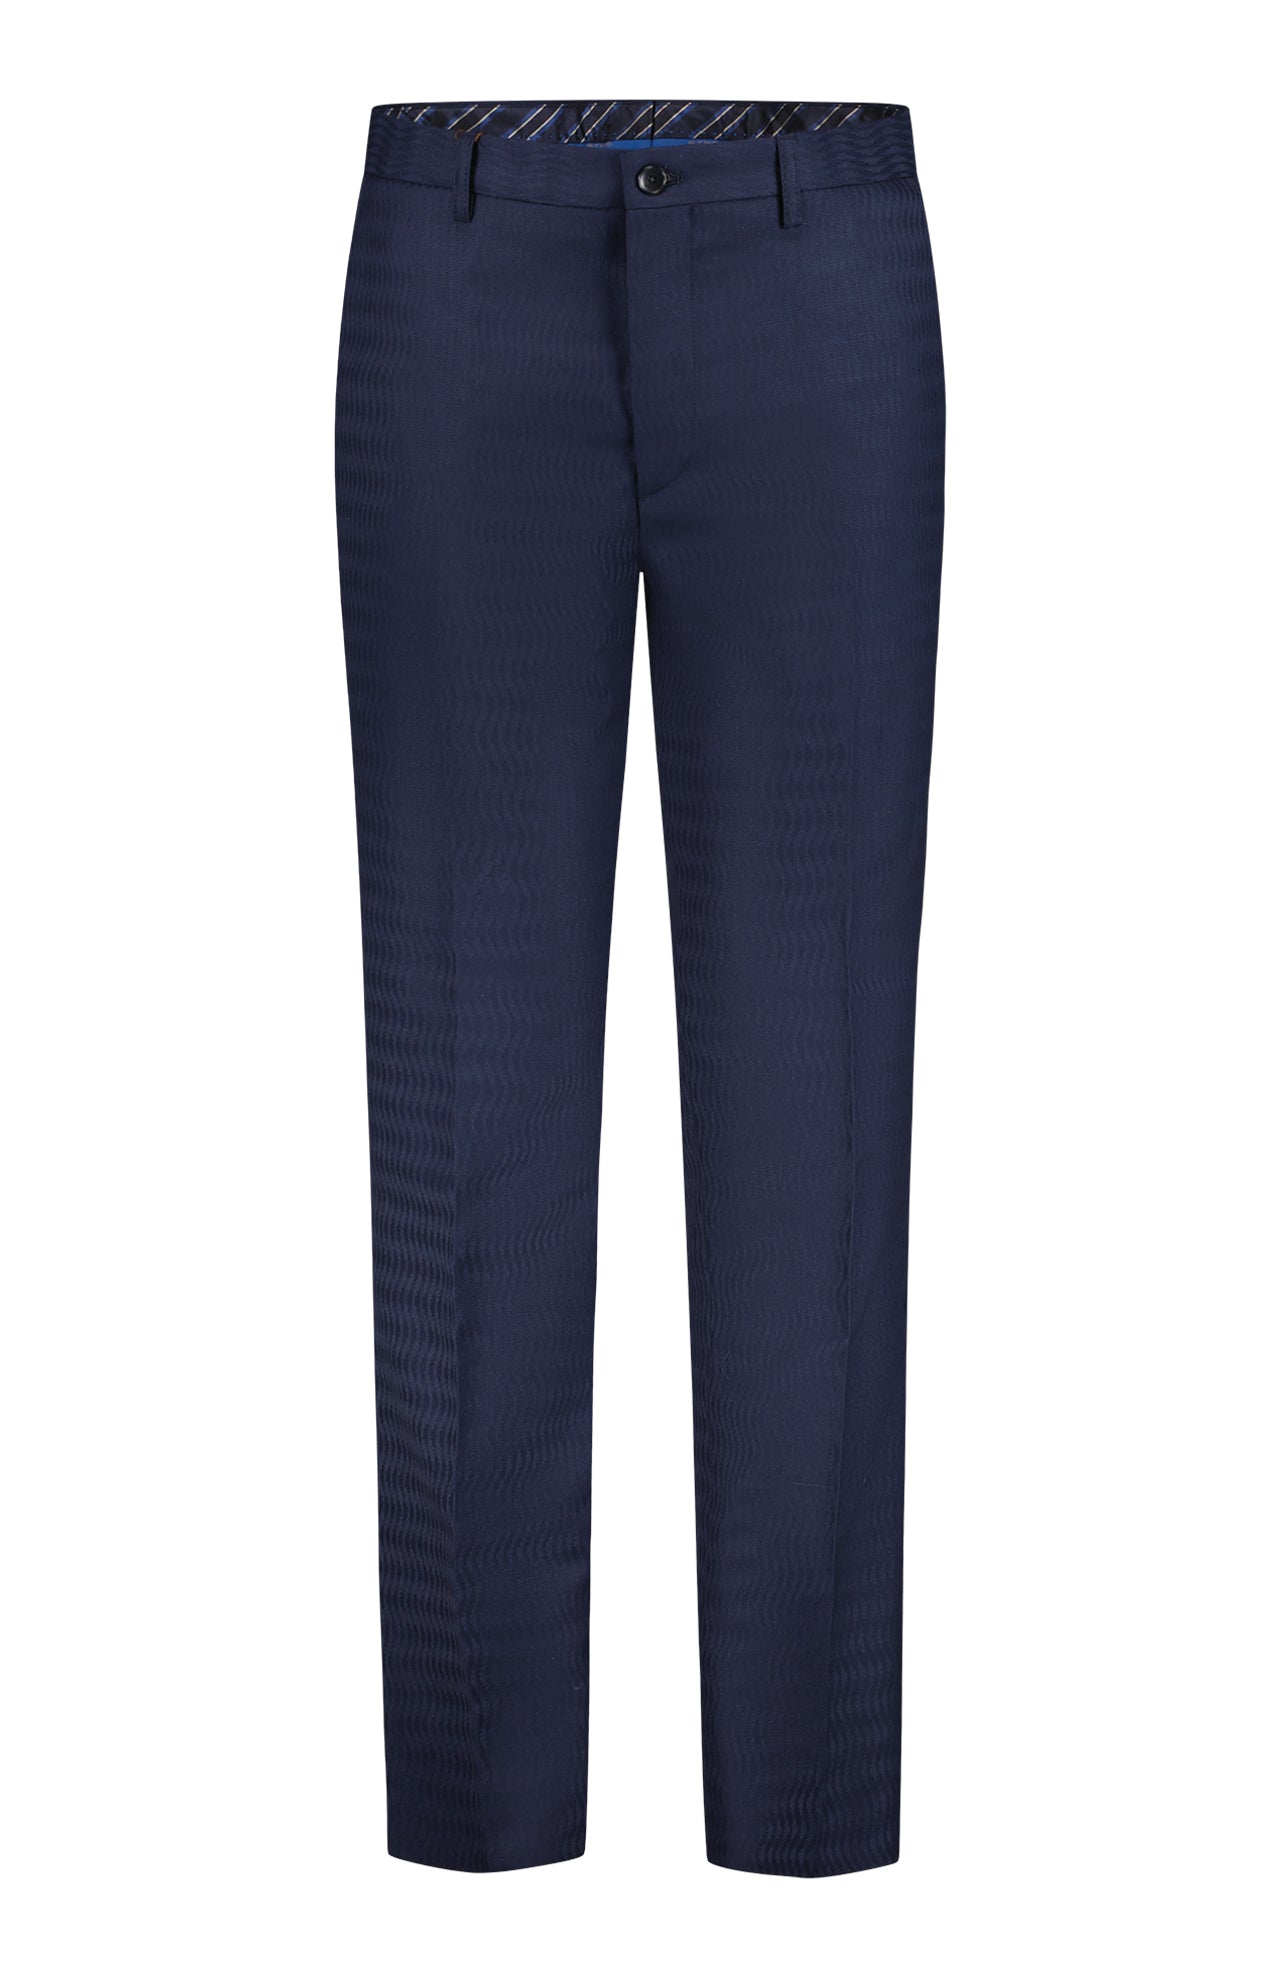 Trousers (7341903642739)